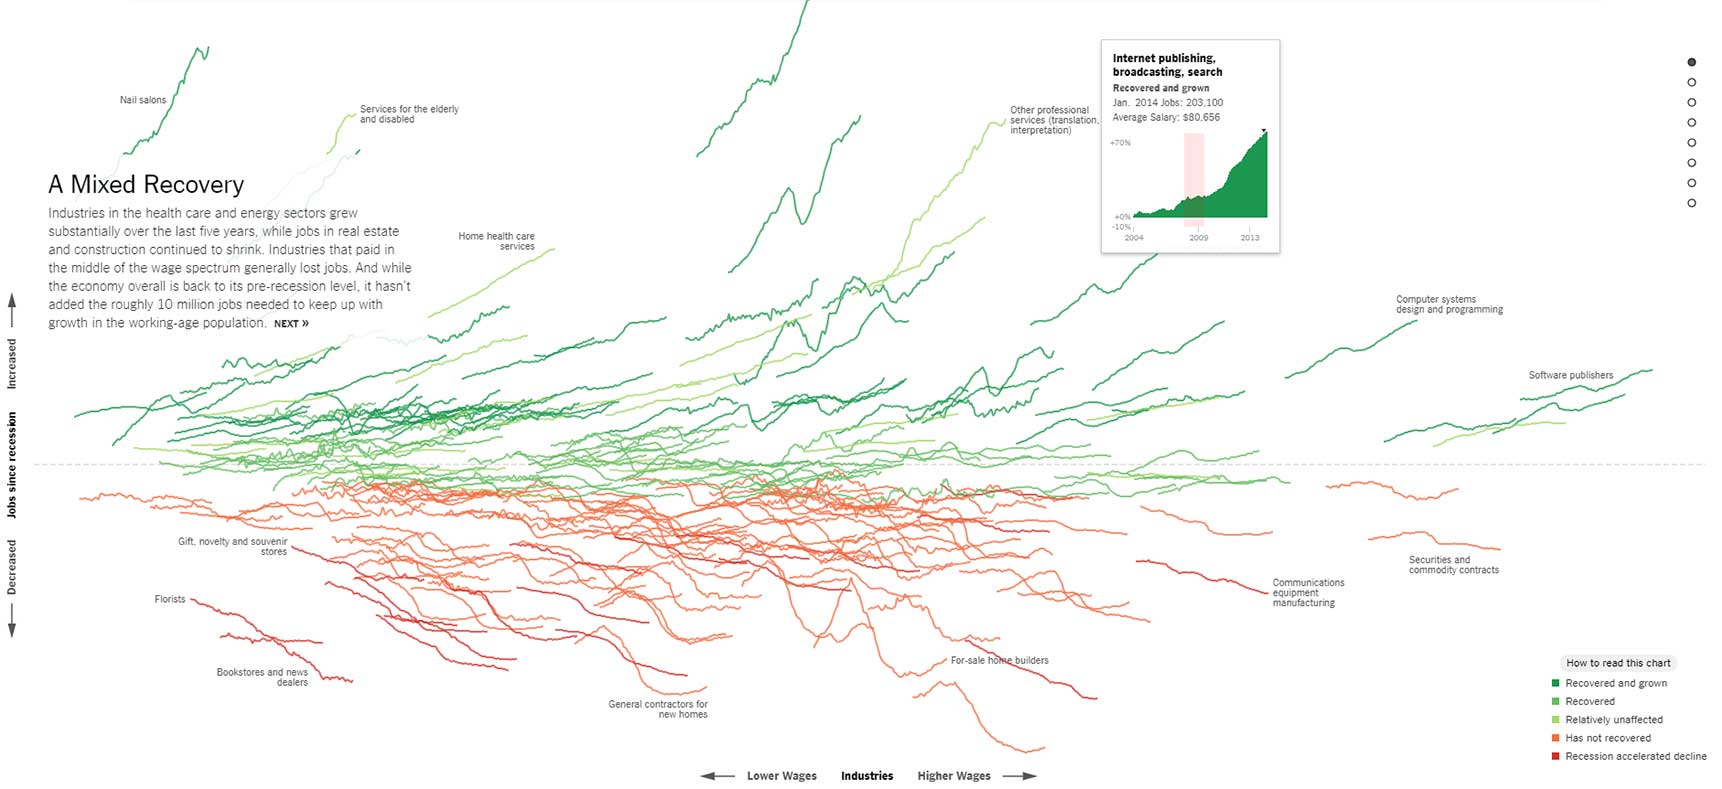 Data visualization showing how different industries performed after the Great Recession in the US.